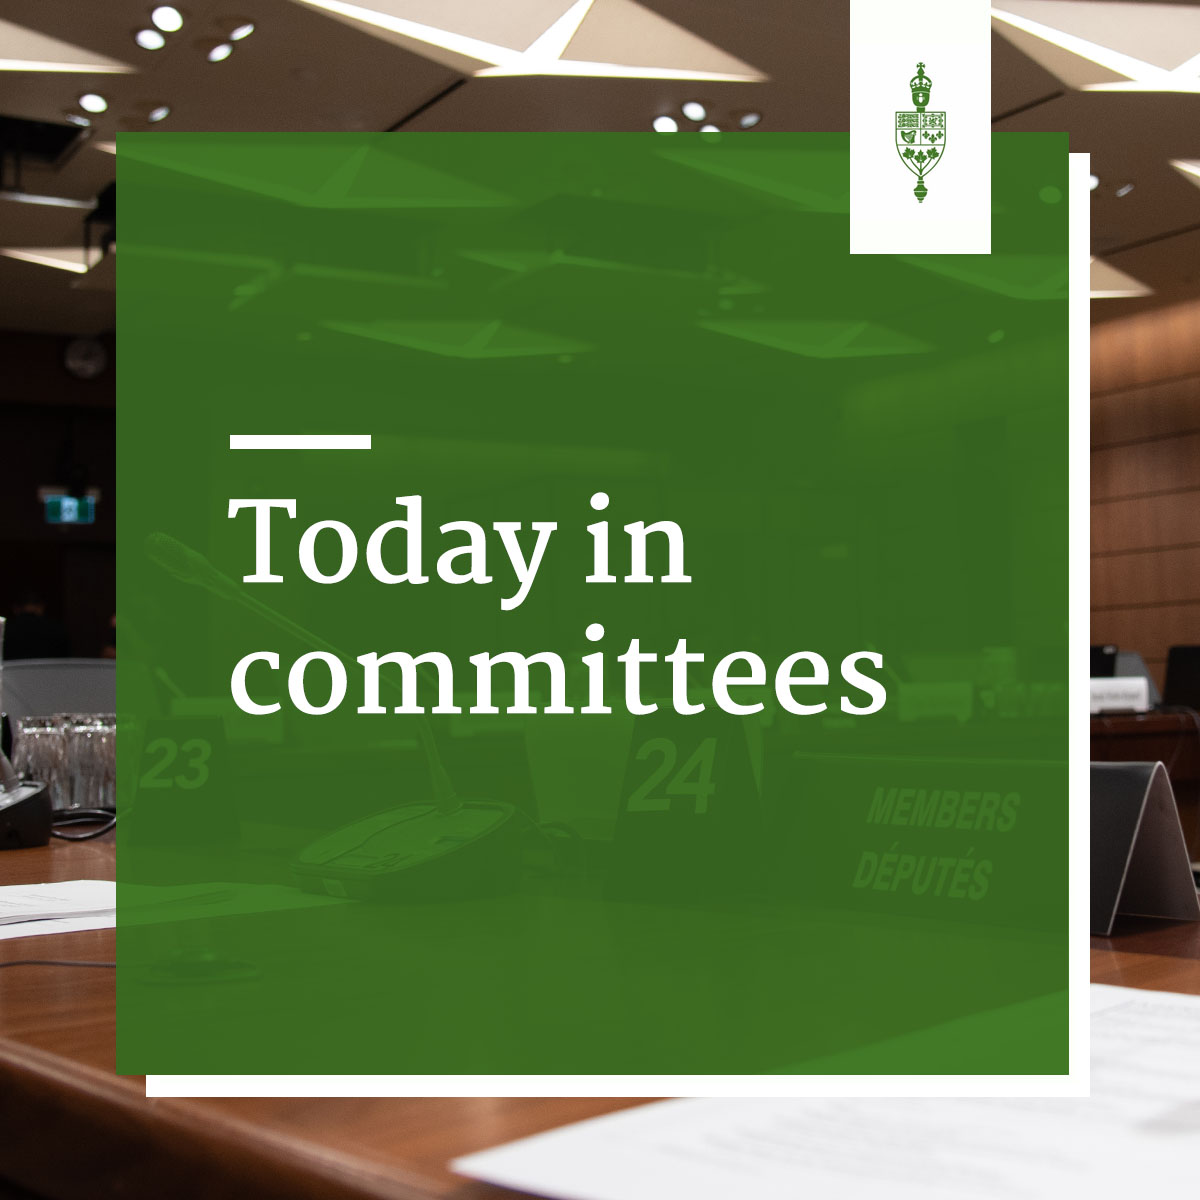 Want to know what's going on in the @HoCCommittees today? #CdnPoli 📝 Consult meeting details and watch live here: ow.ly/SNSo50PXHLm